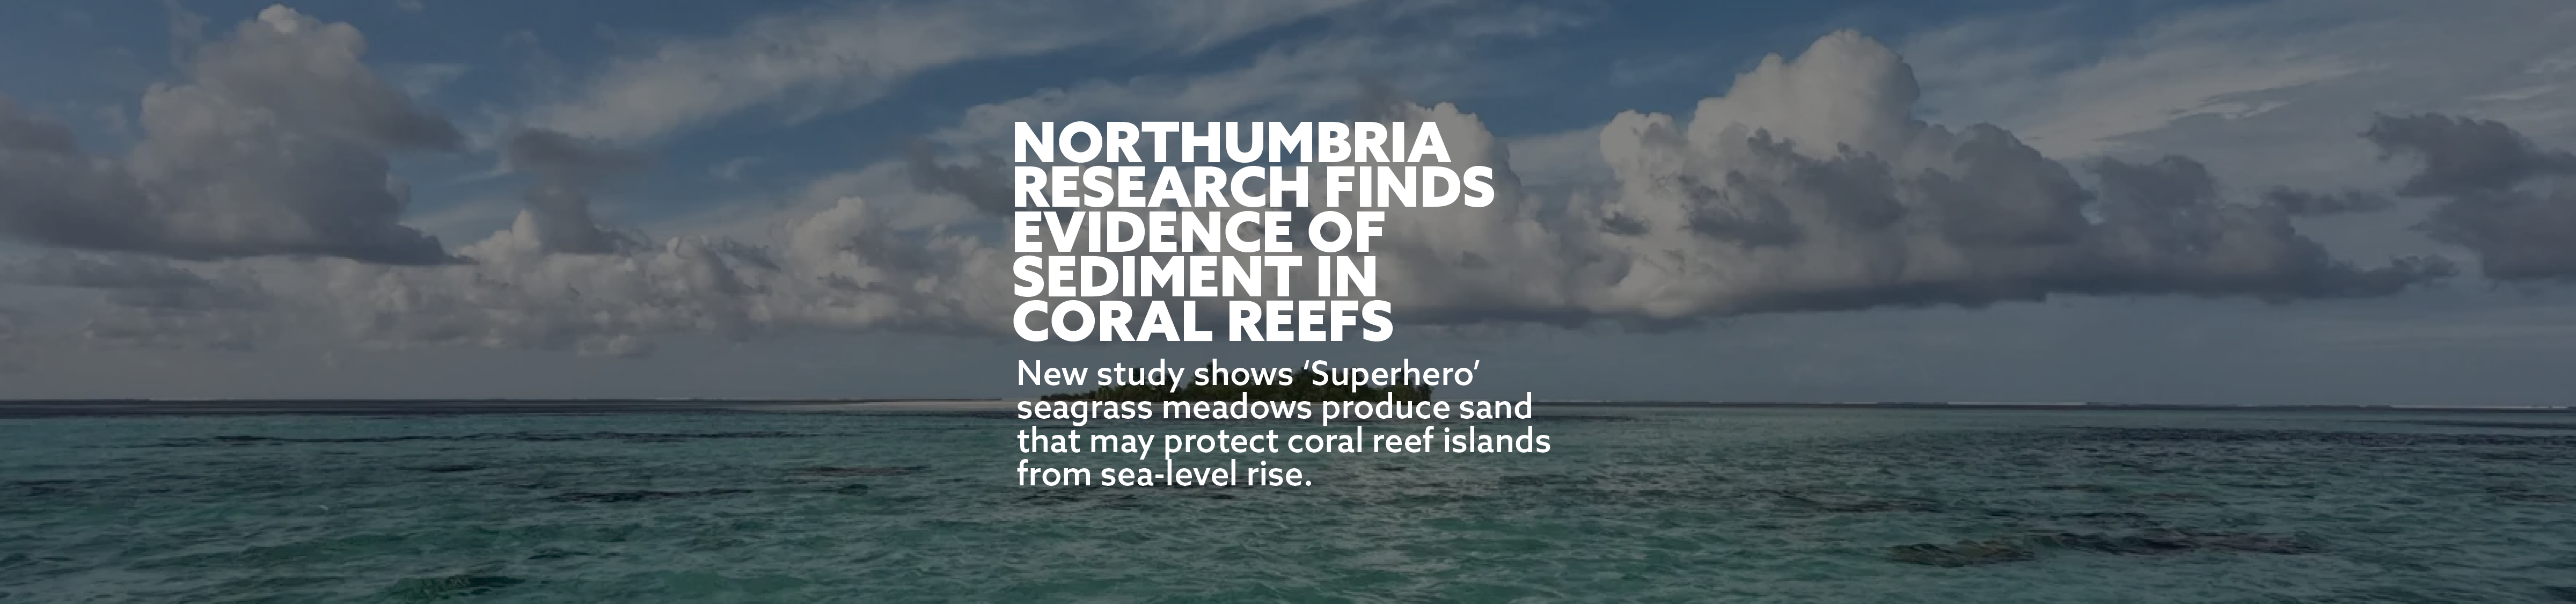 Northumbria Research finds evidence of sediment in coral reefs